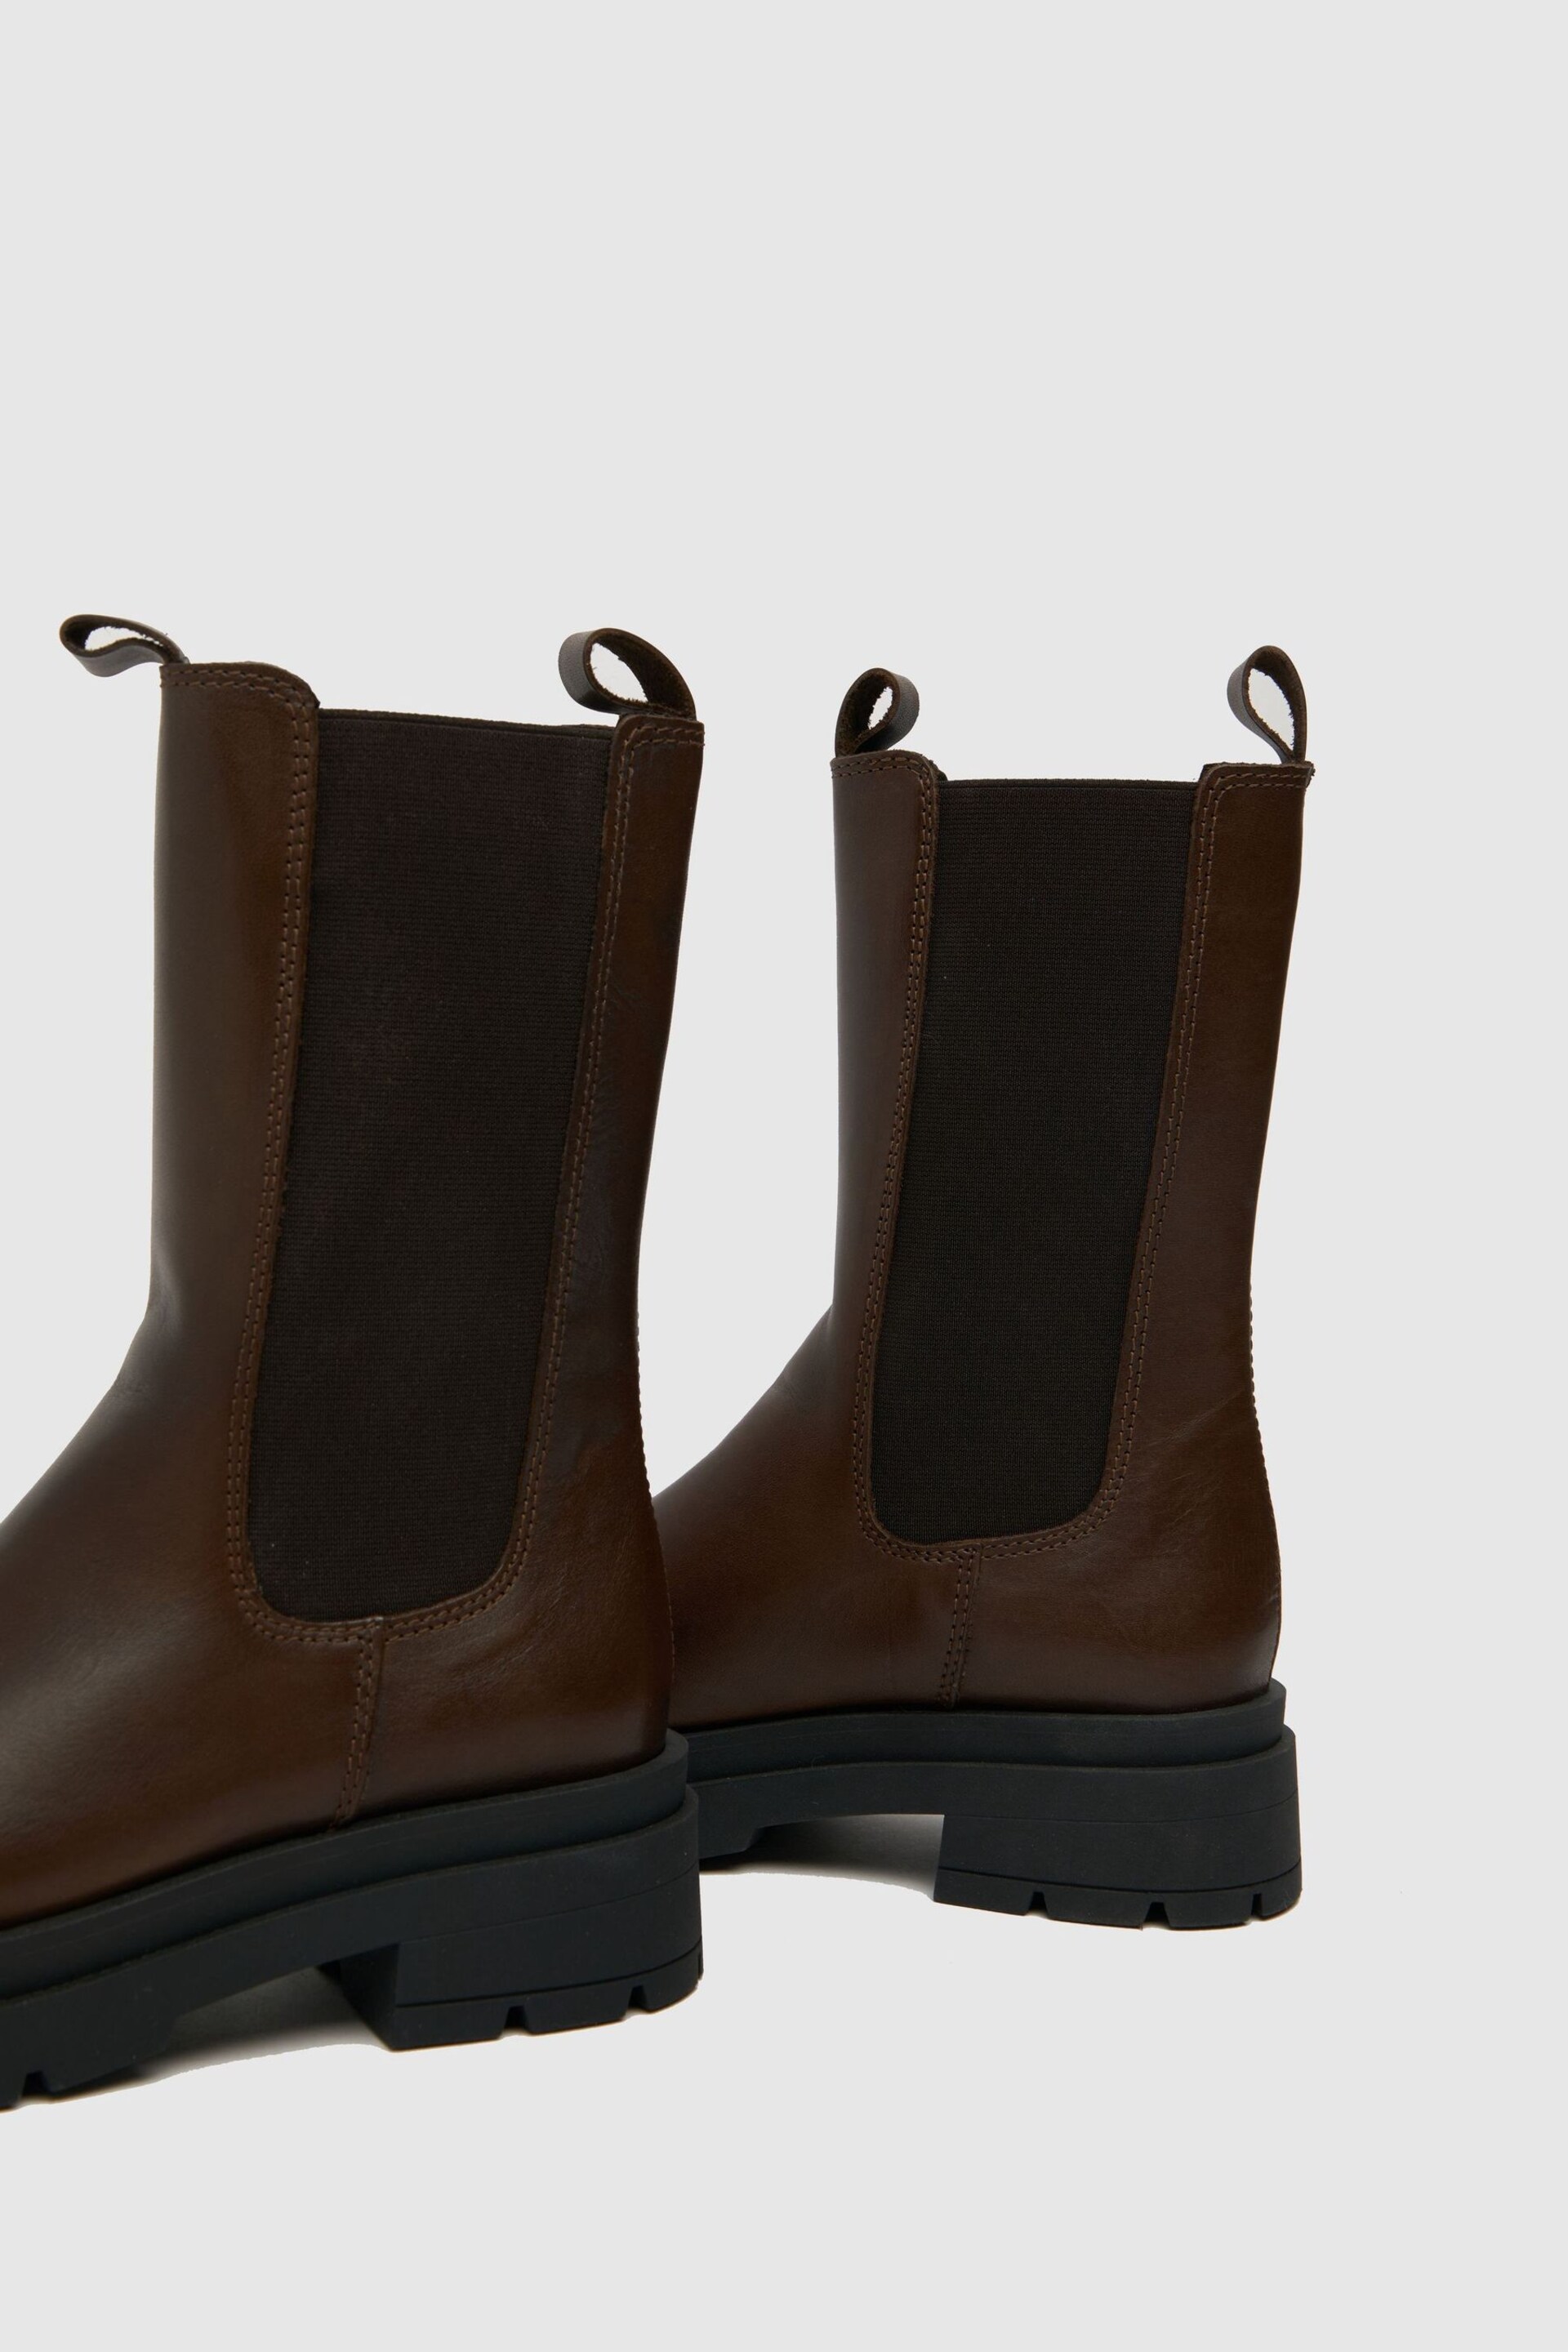 Schuh August High Cut Chelsea Brown Boots - Image 3 of 4